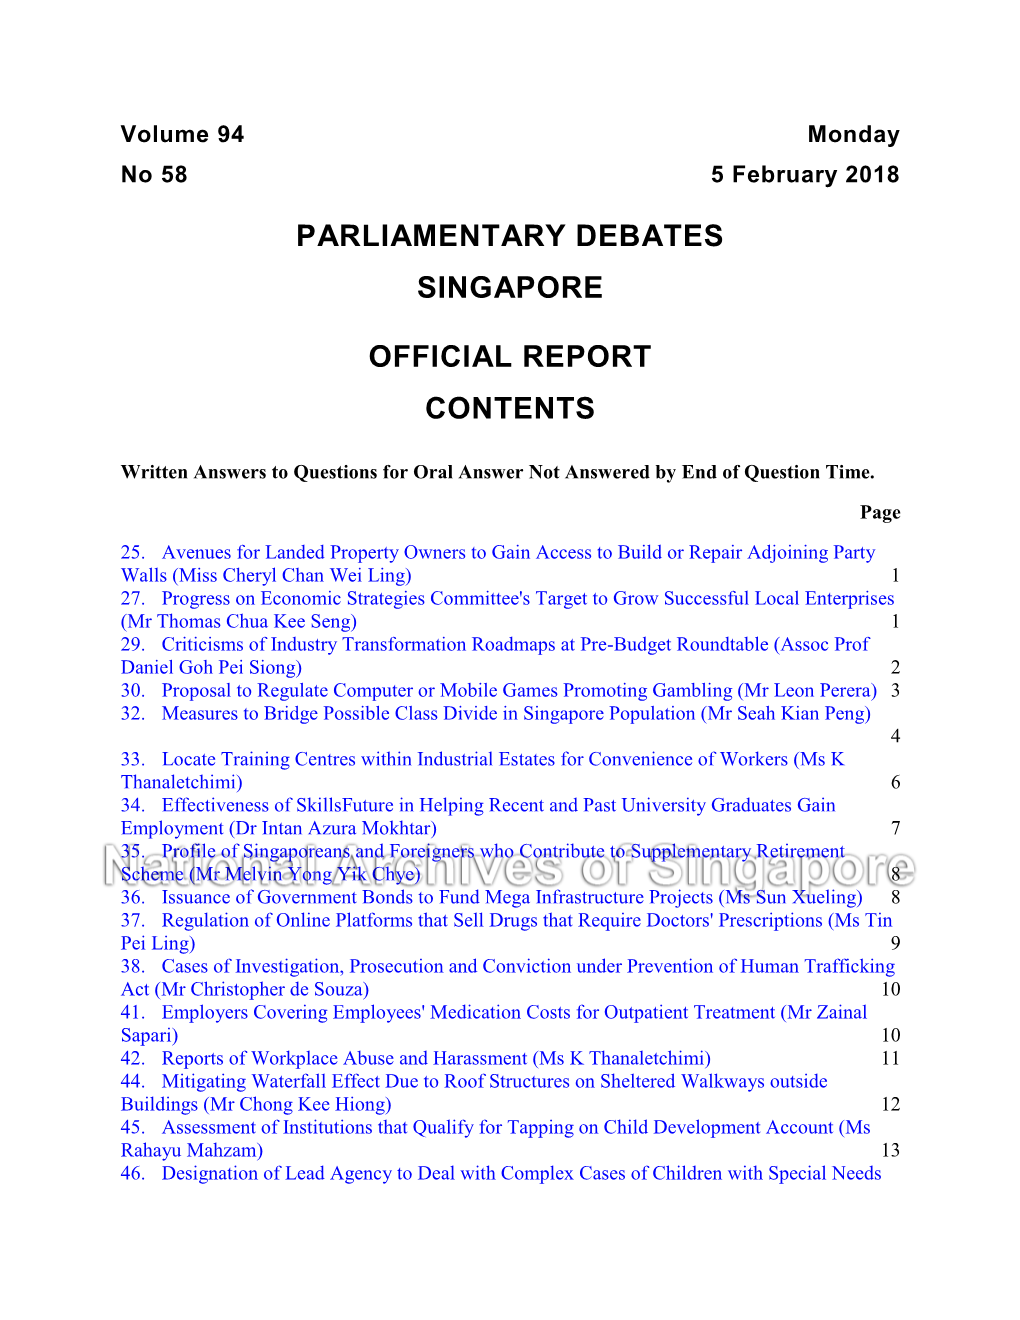 Parliamentary Debates Singapore Official Report Contents